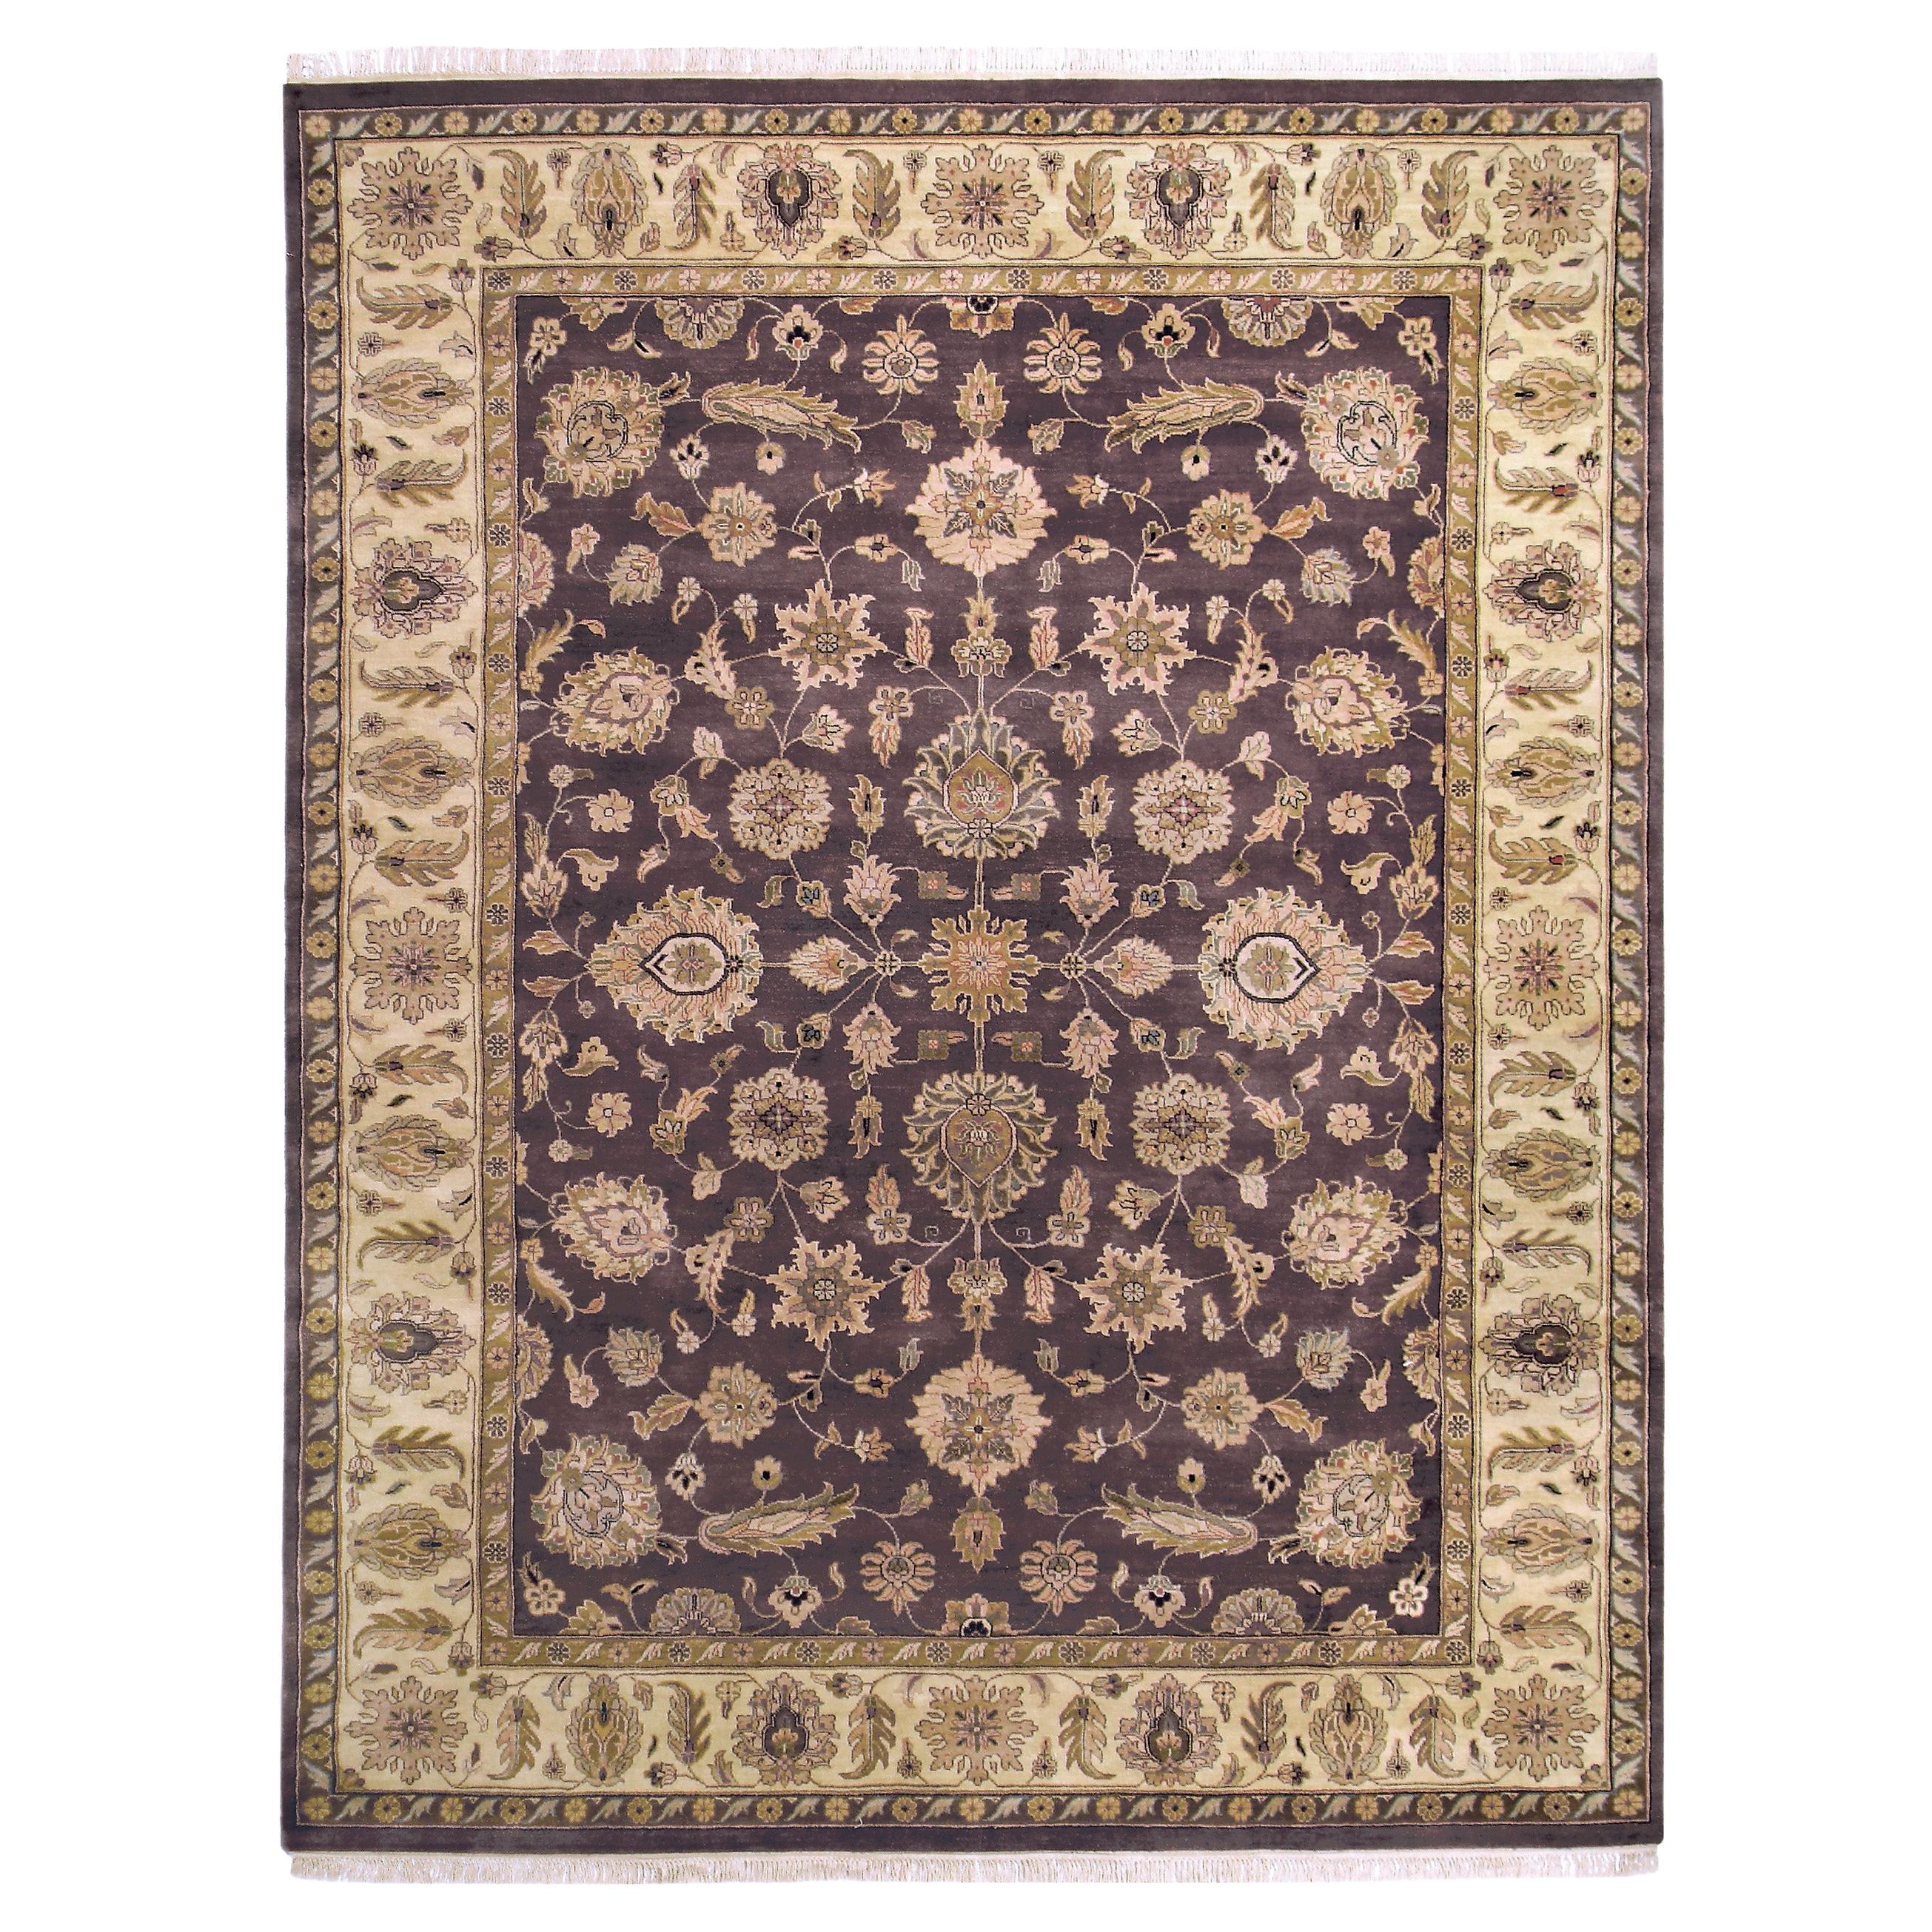 Luxury Traditional Hand-Knotted Mahal Mocha and Ivory 12x18 Rug